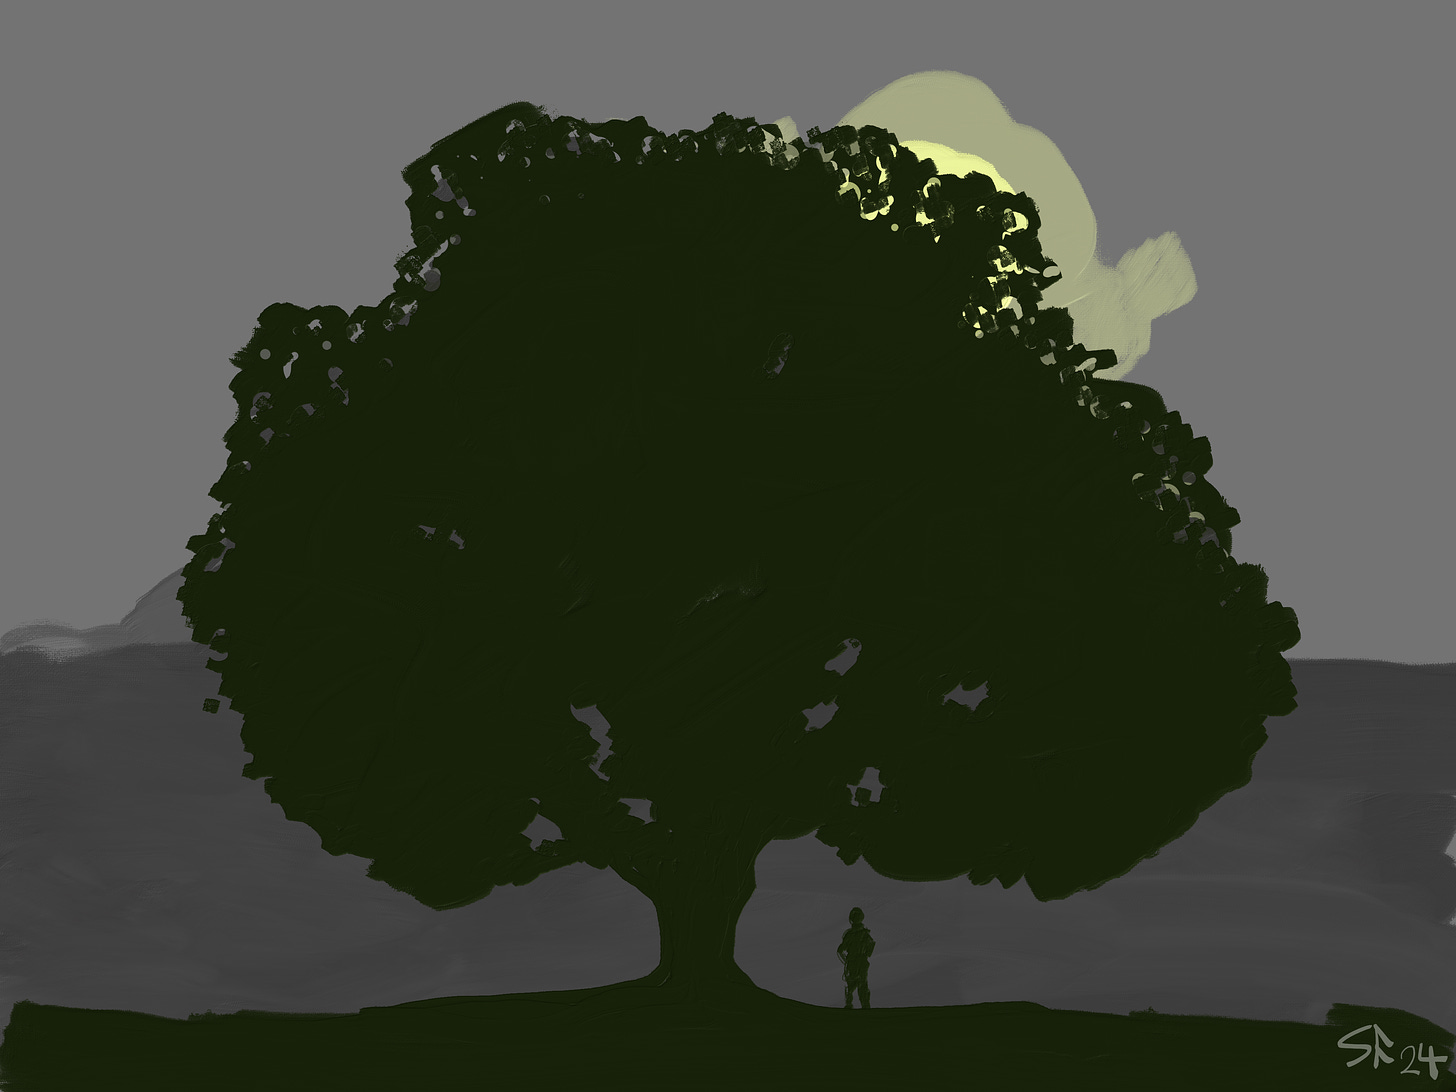 Silhouette of a small human figure next to the trunk of a large tree (walnut) by night. Moon behind tree canopy.